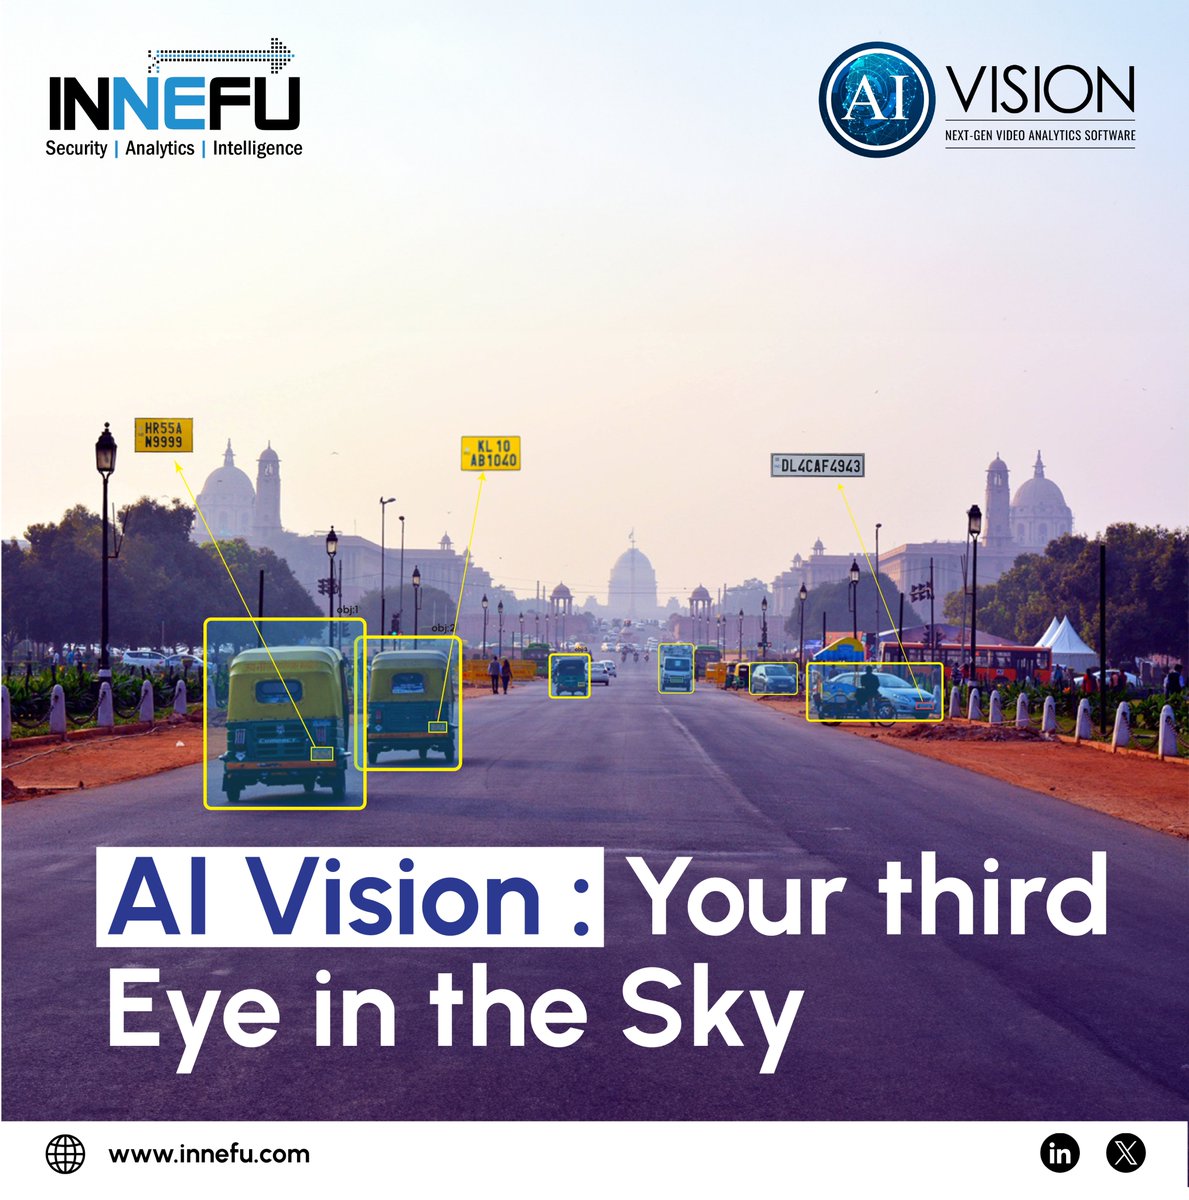 Meet AI Vision : Our facial recognition and video analytics software.
Detect intrusions, persons, objects, and weapons with 98.3% accuracy. Real-time facial recognition for enhanced safety.
#AIVision #FacialRecognition #VideoAnalytics 
@NICMeity @BSF_India @crpfindia @SIDMIndia